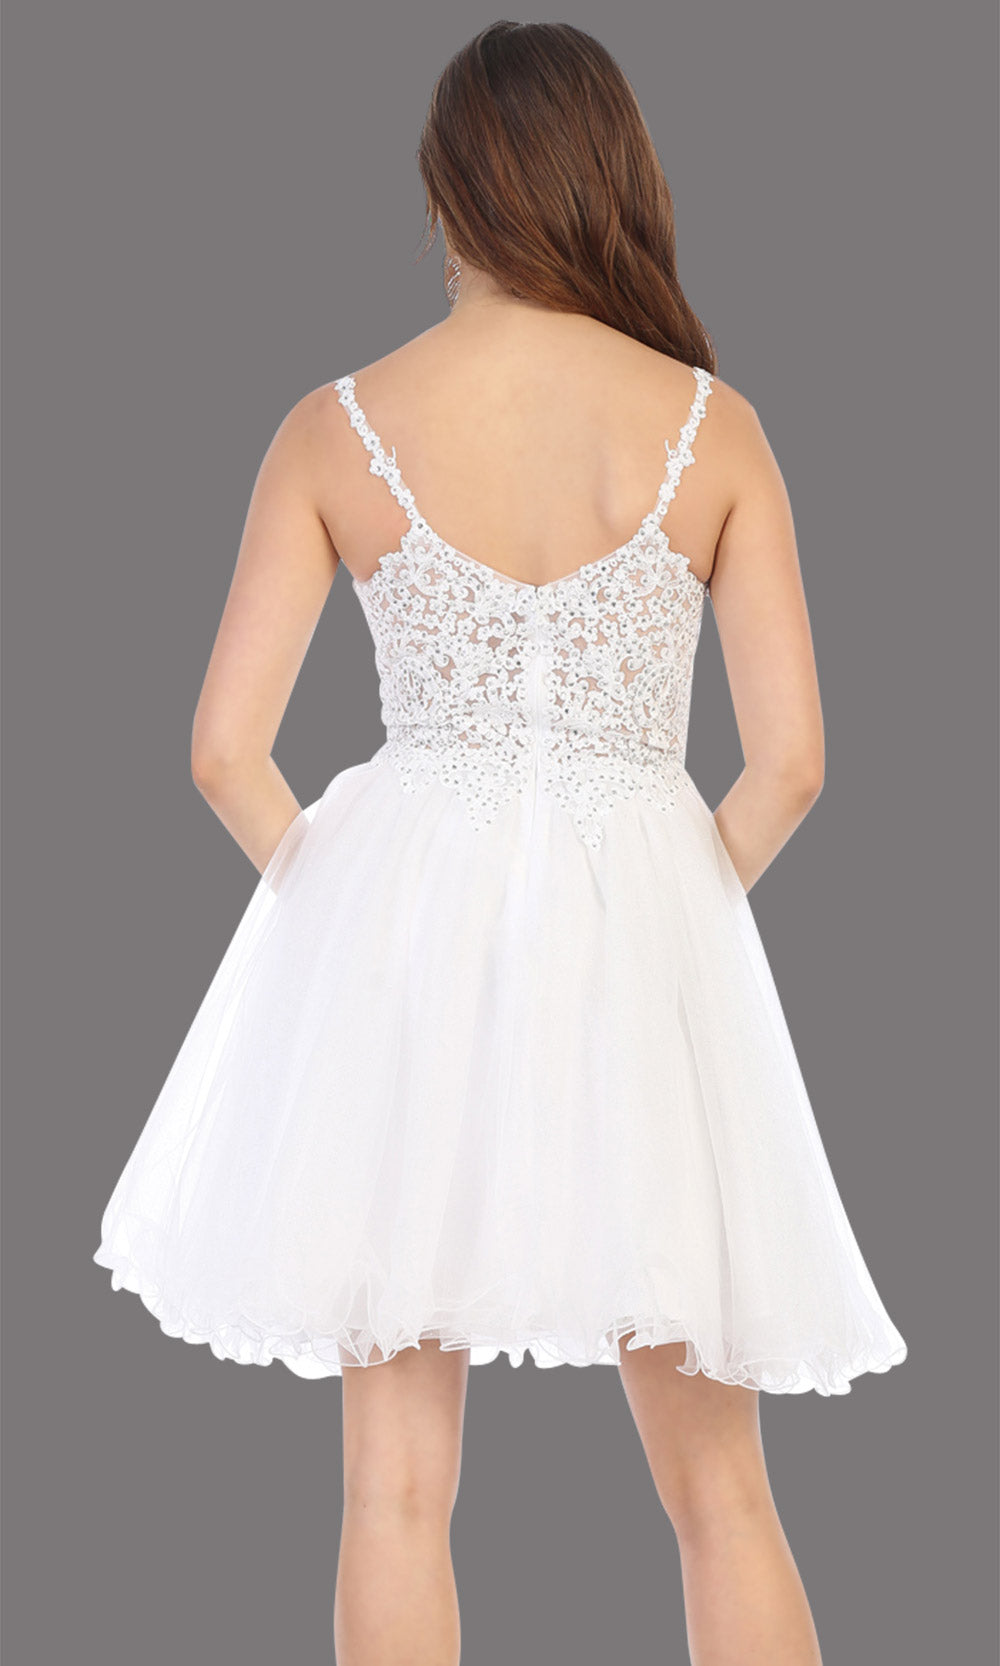 Mayqueen Mq1693 short white flowy v neck beaded sequin grade 8 graduation dress w/straps & puffy skirt. This white party dress is perfect for prom, graduation, grade 8 grad, confirmation dress, bat mitzvah dress, damas. Plus sizes avail-back.jpggrade 8 grad dresses, graduation dresses